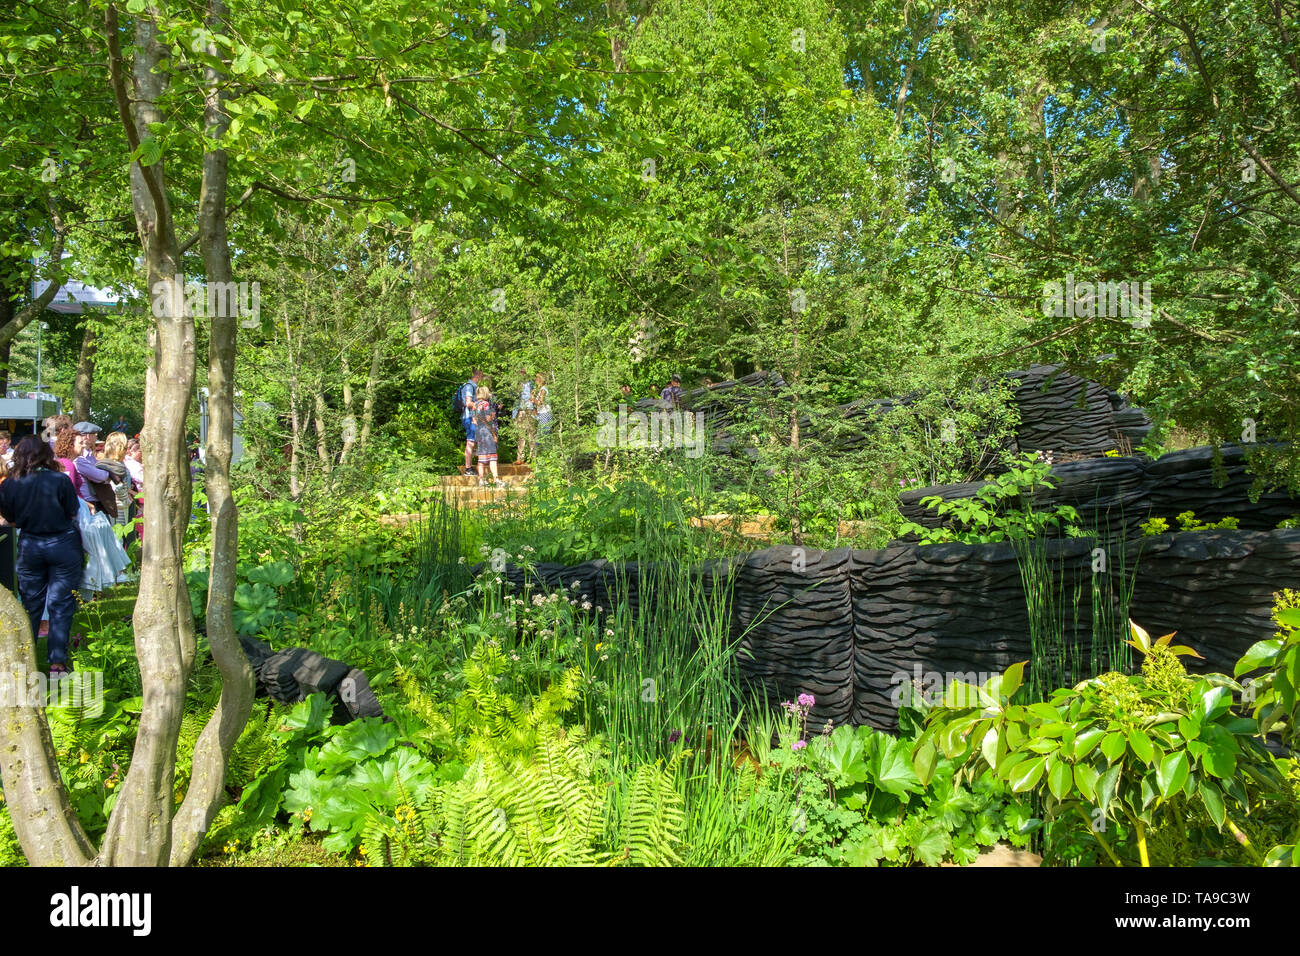 London, UK - May 22nd 2019: RHS Chelsea Flower Show, the M&G Garden judged to be the best in show. Controversial as it was planted mainly in green. Stock Photo